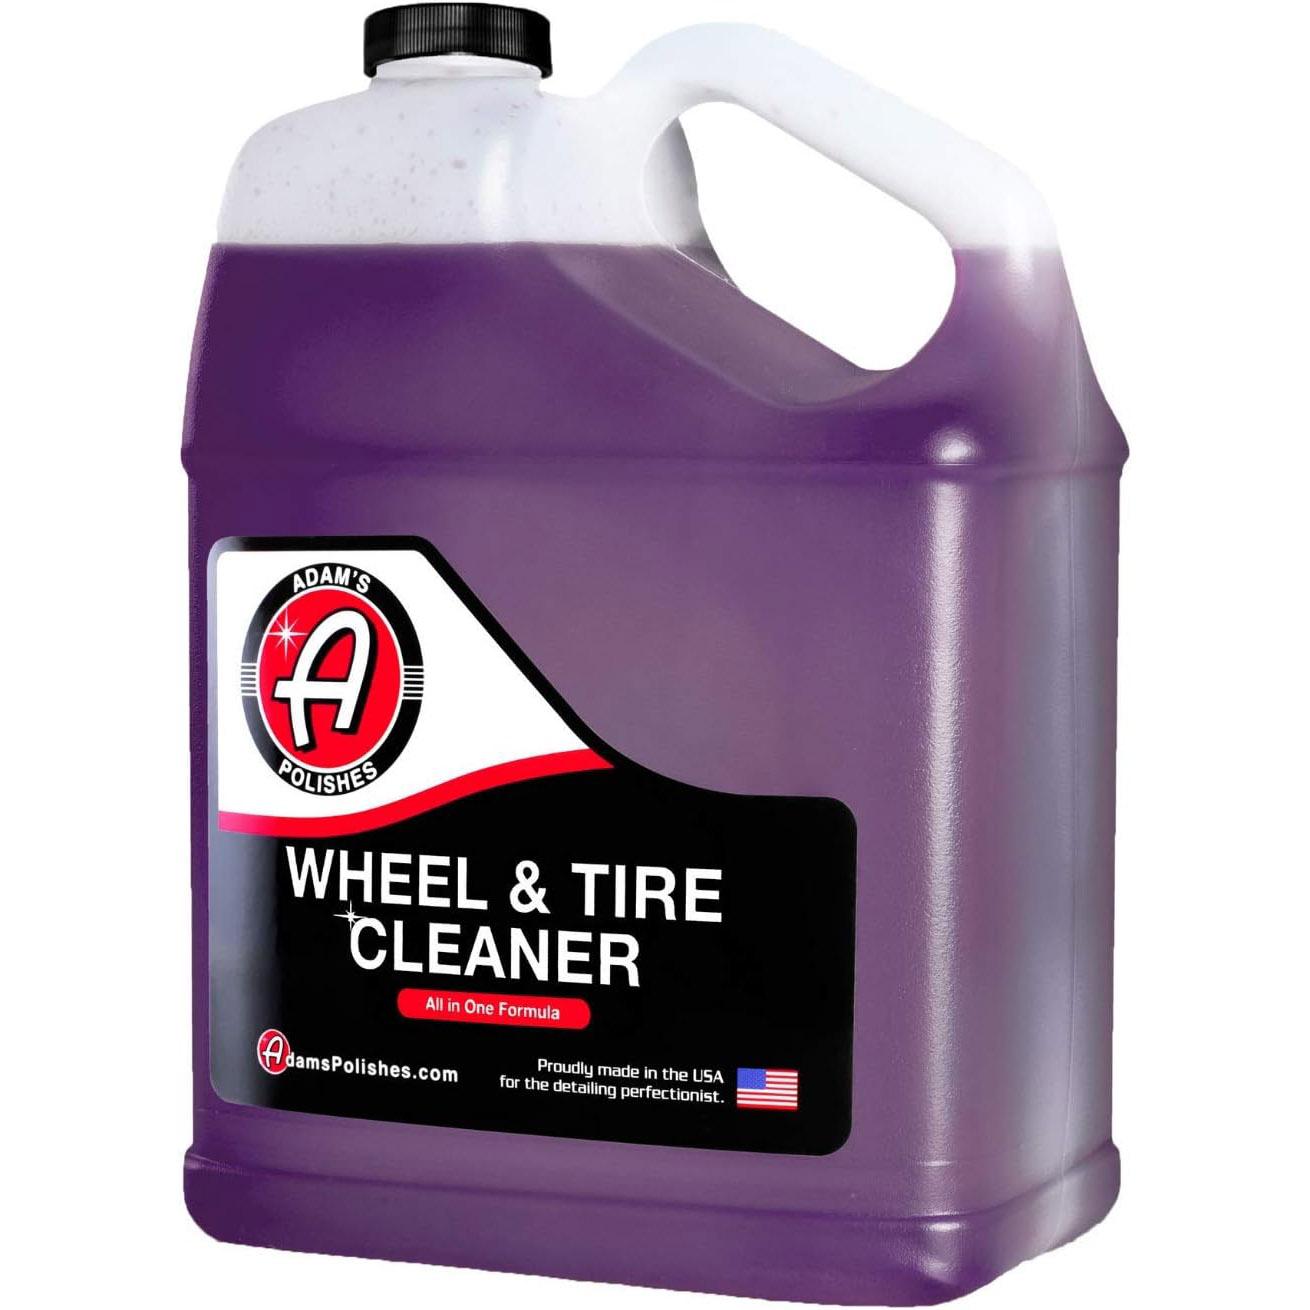 Adams Polishes Wheel and Tire Professional Cleaner for $24.29 Shipped